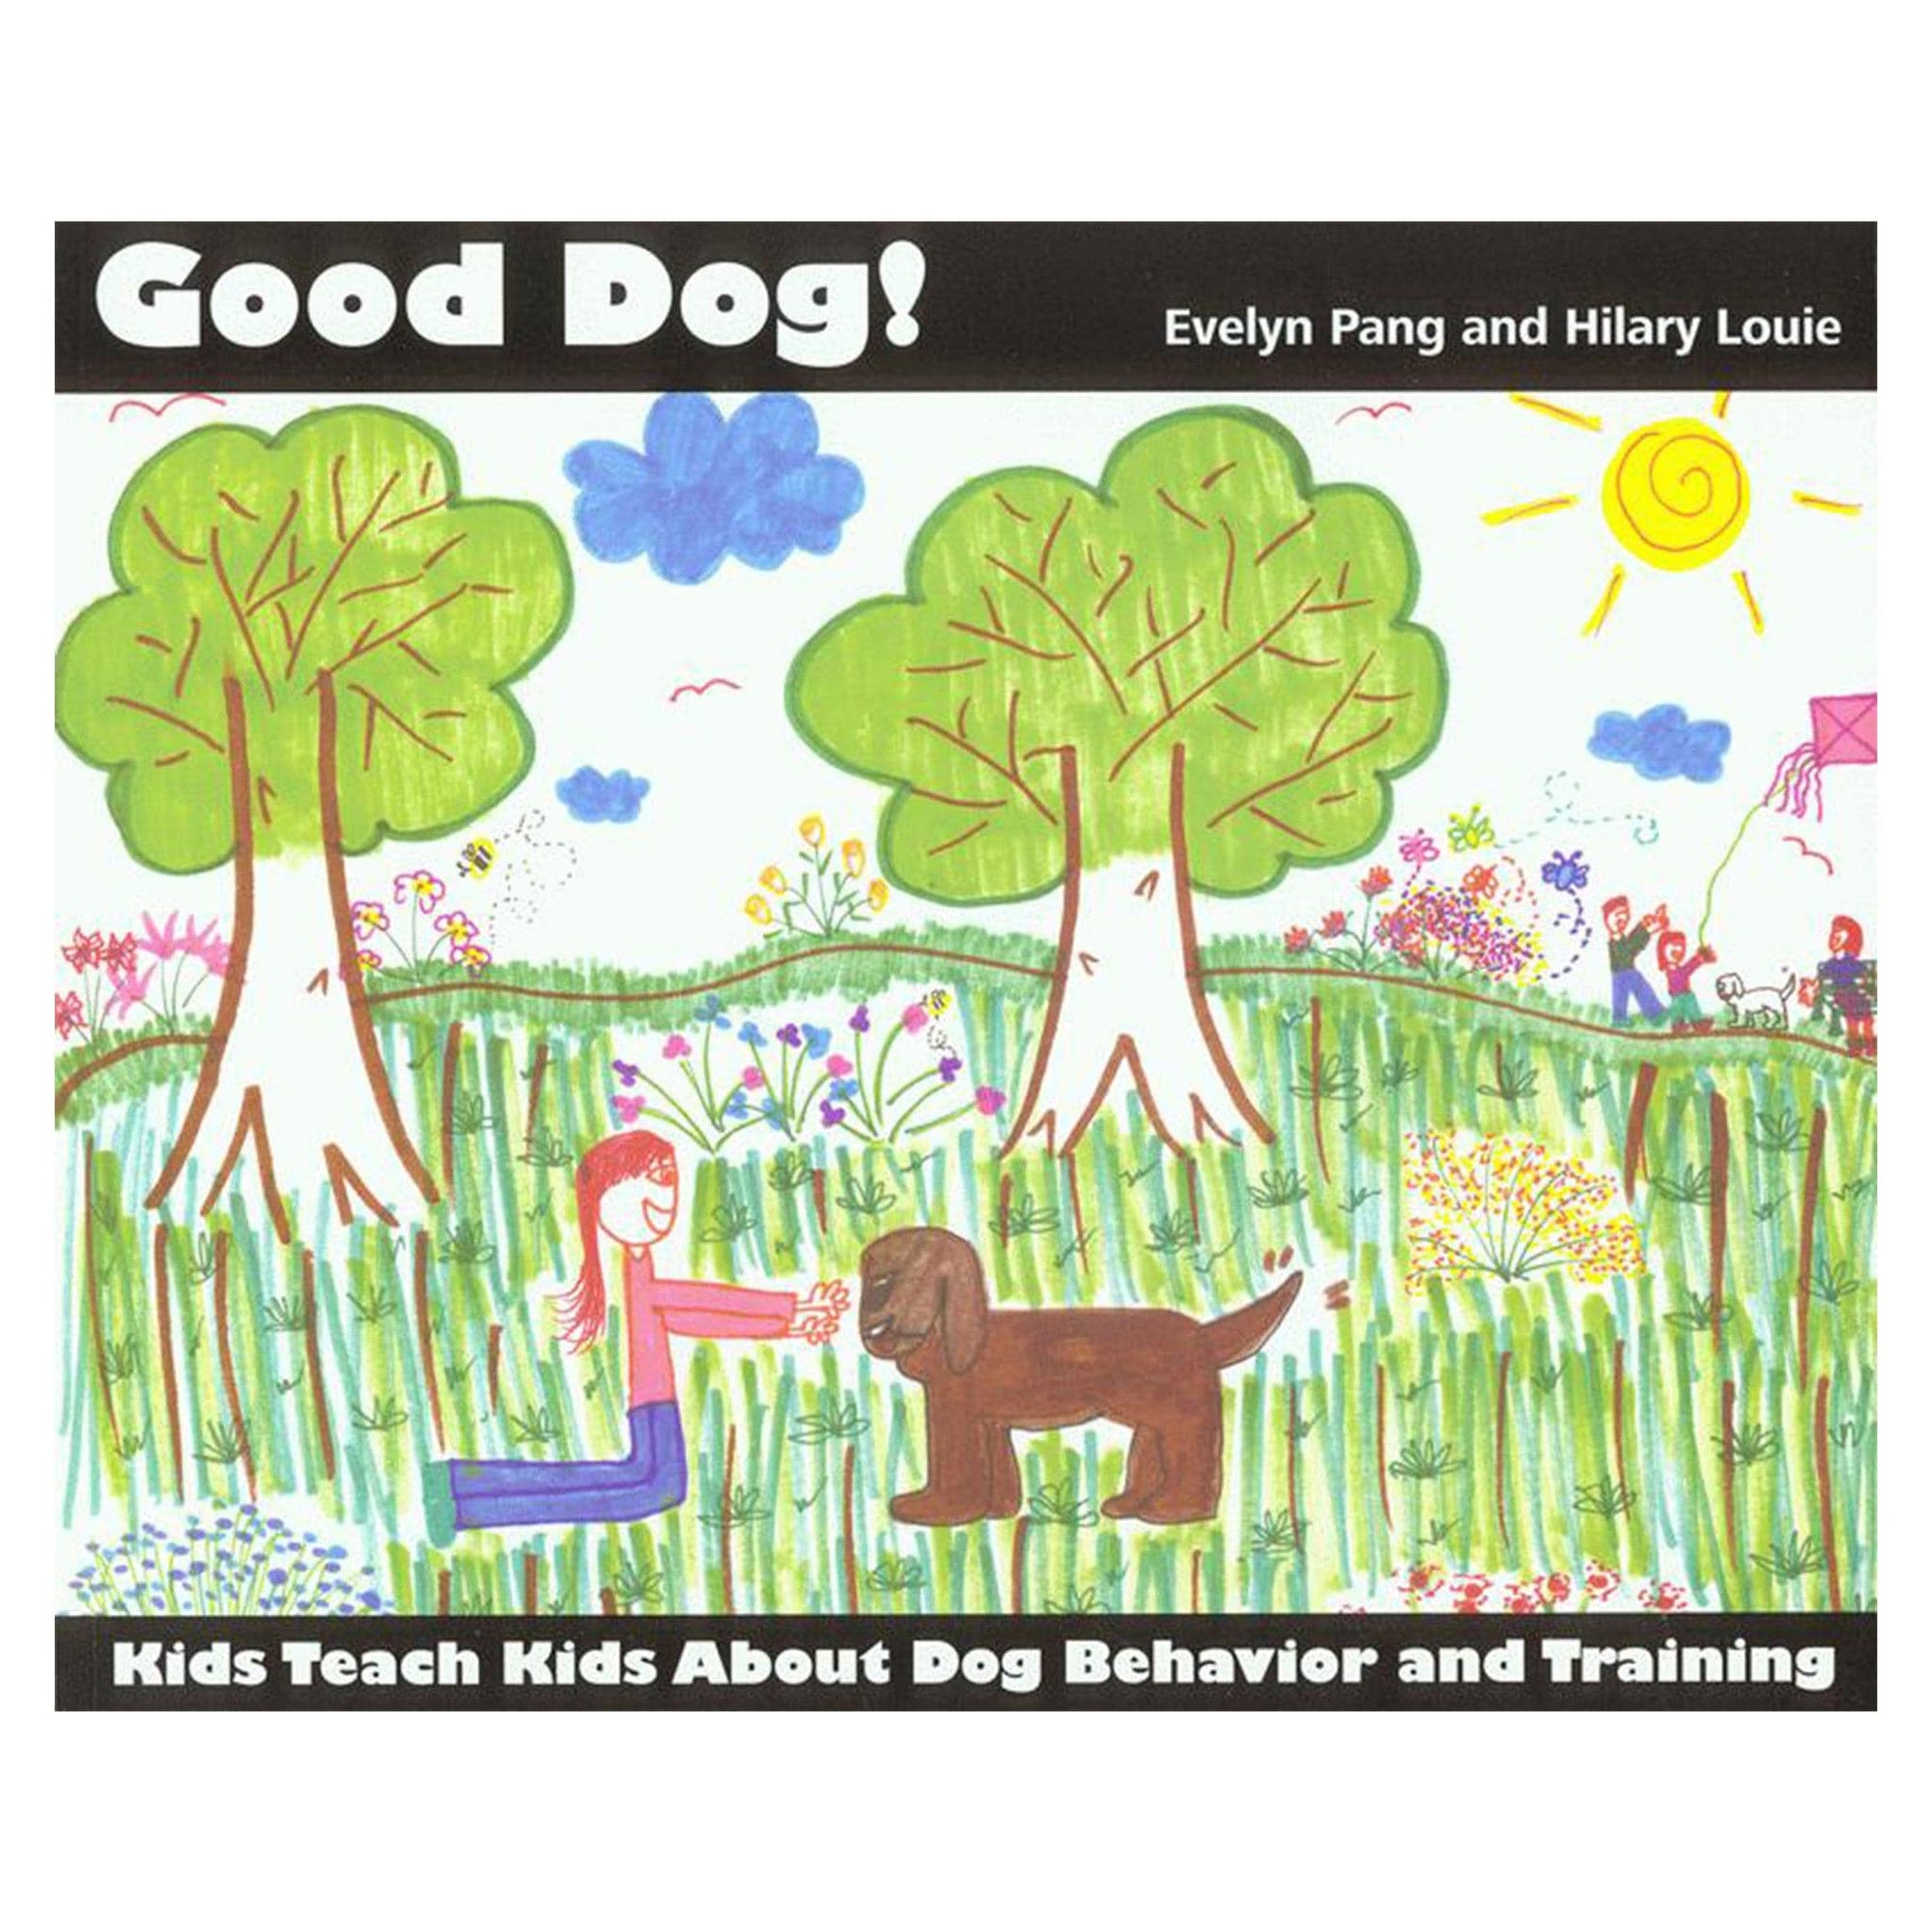 E-BOOK Good Dog! Kids Teach Kids About Dog Behavior and Training by Evelyn Pang and Hilary Louie